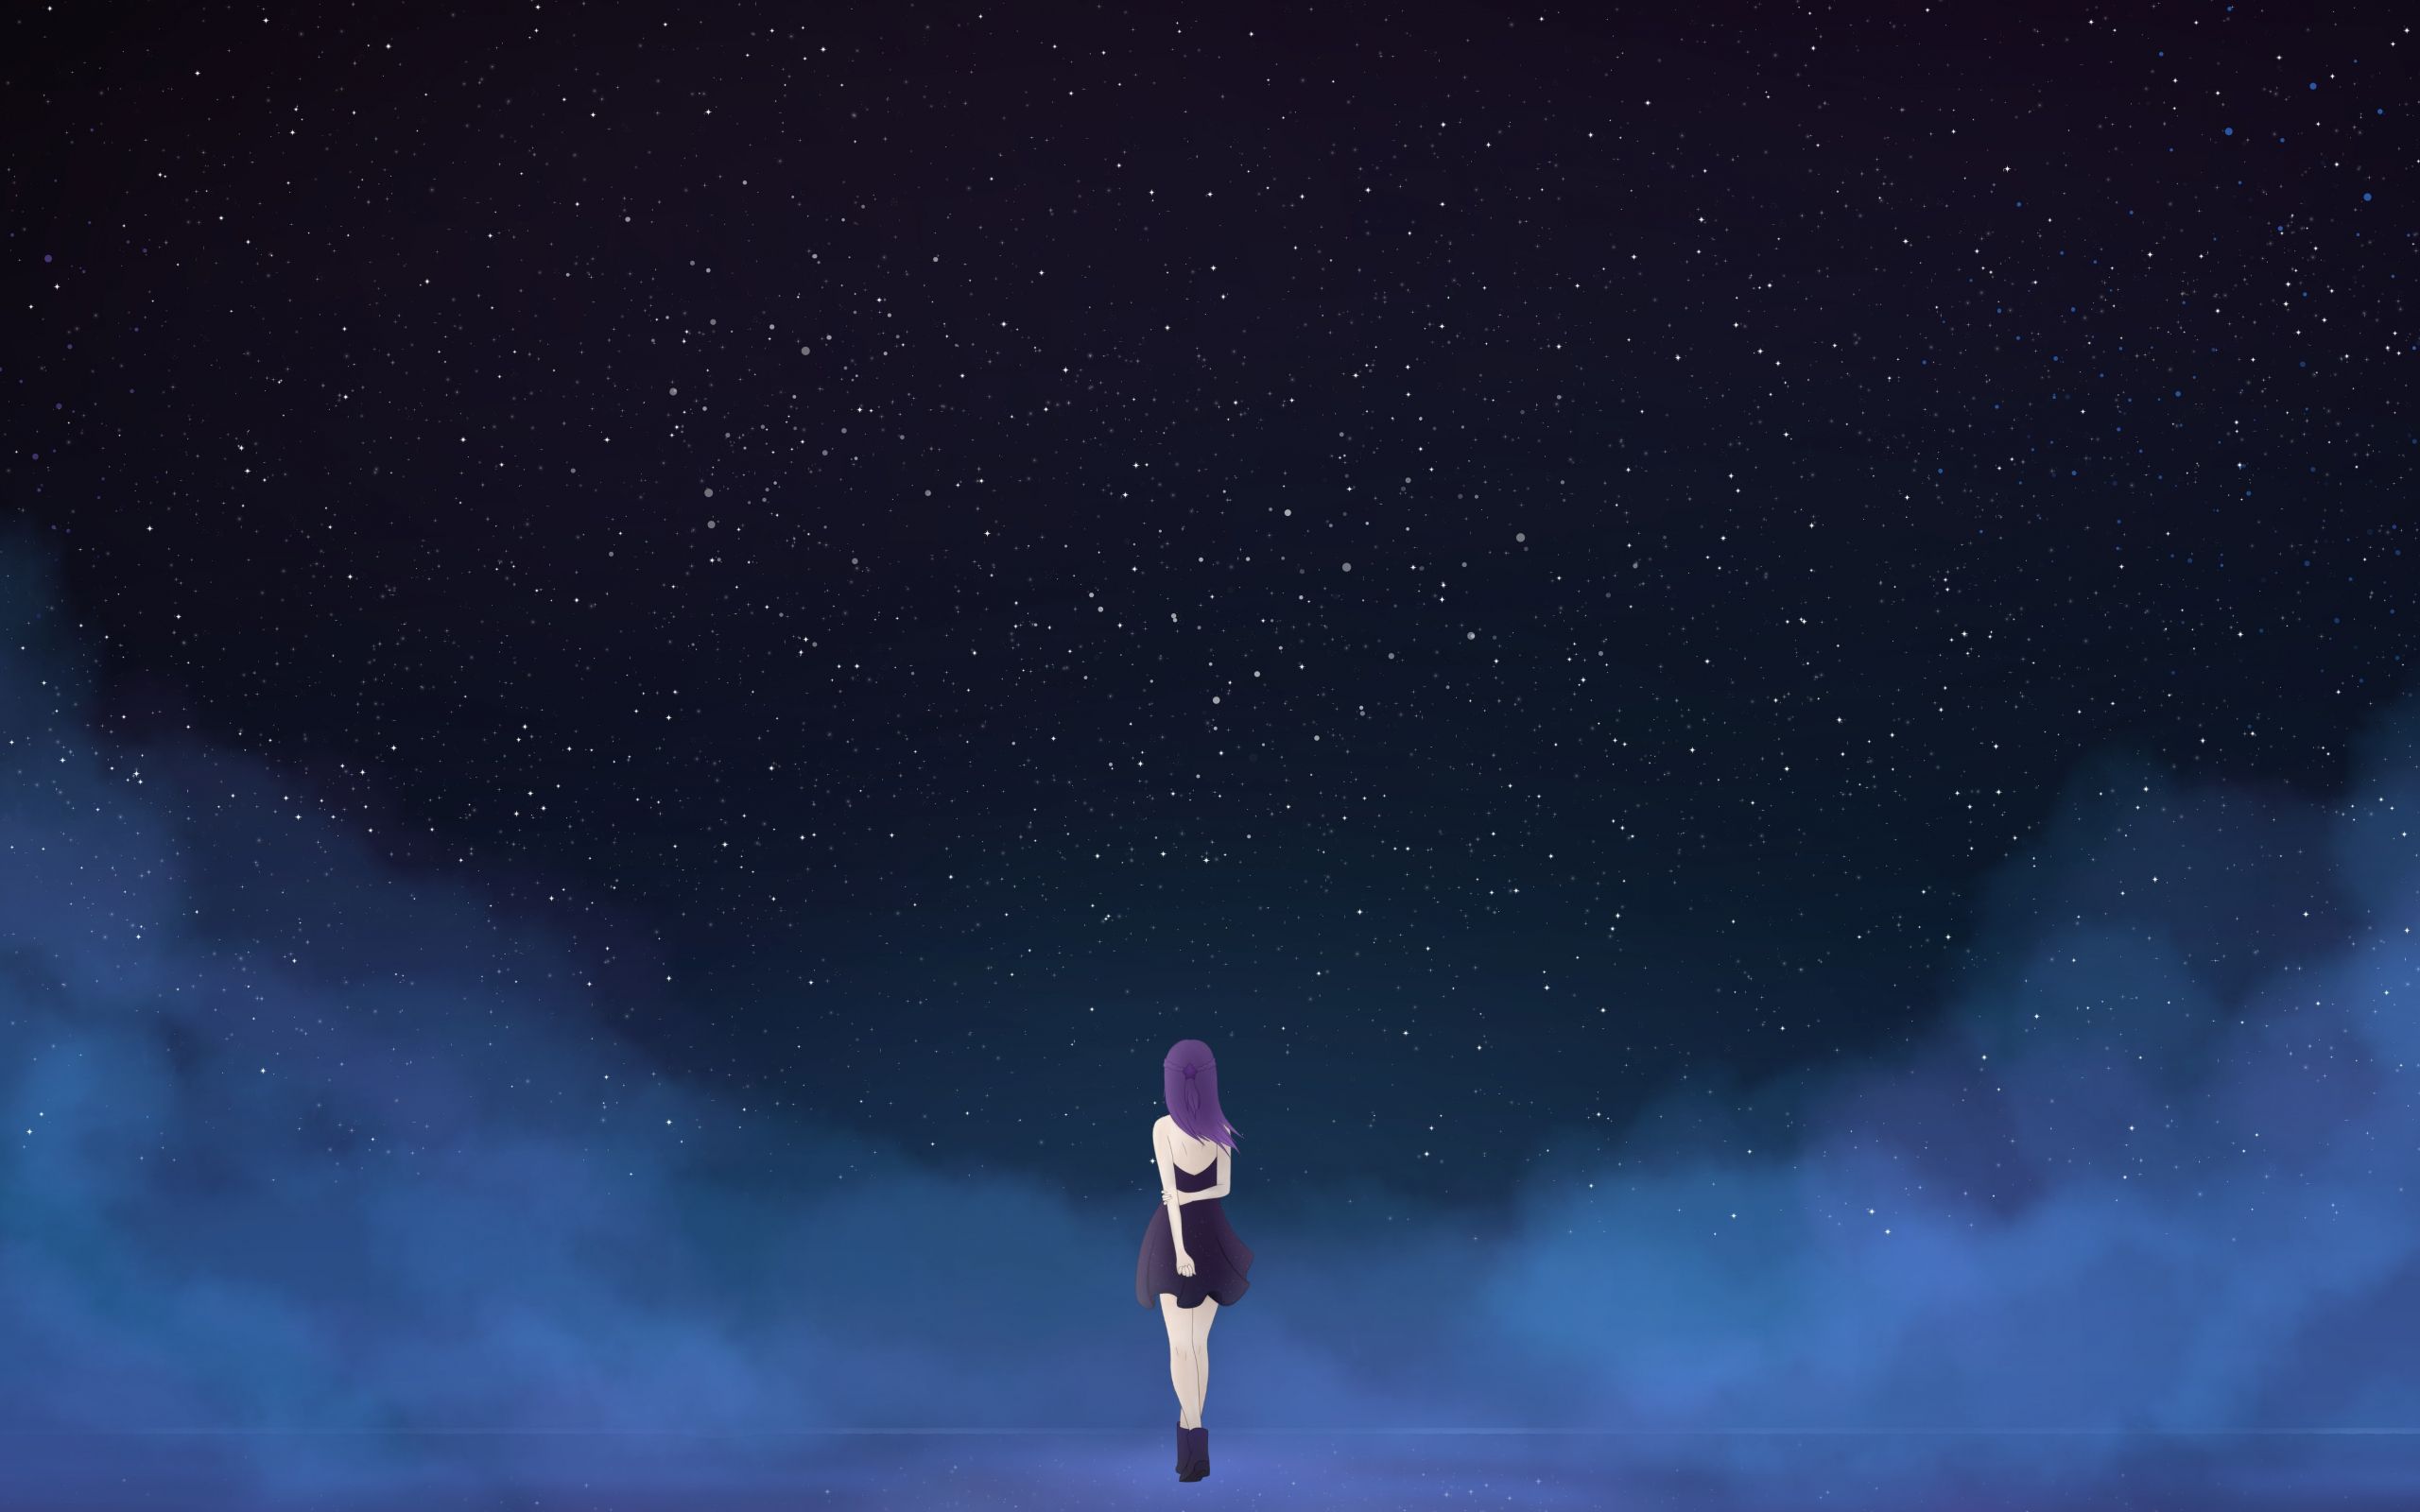 Download 2560x1600 wallpaper starry sky, fantasy, anime girl, minimal, night, dual wide, widescreen 16: widescreen, 2560x1600 HD image, background, 19808